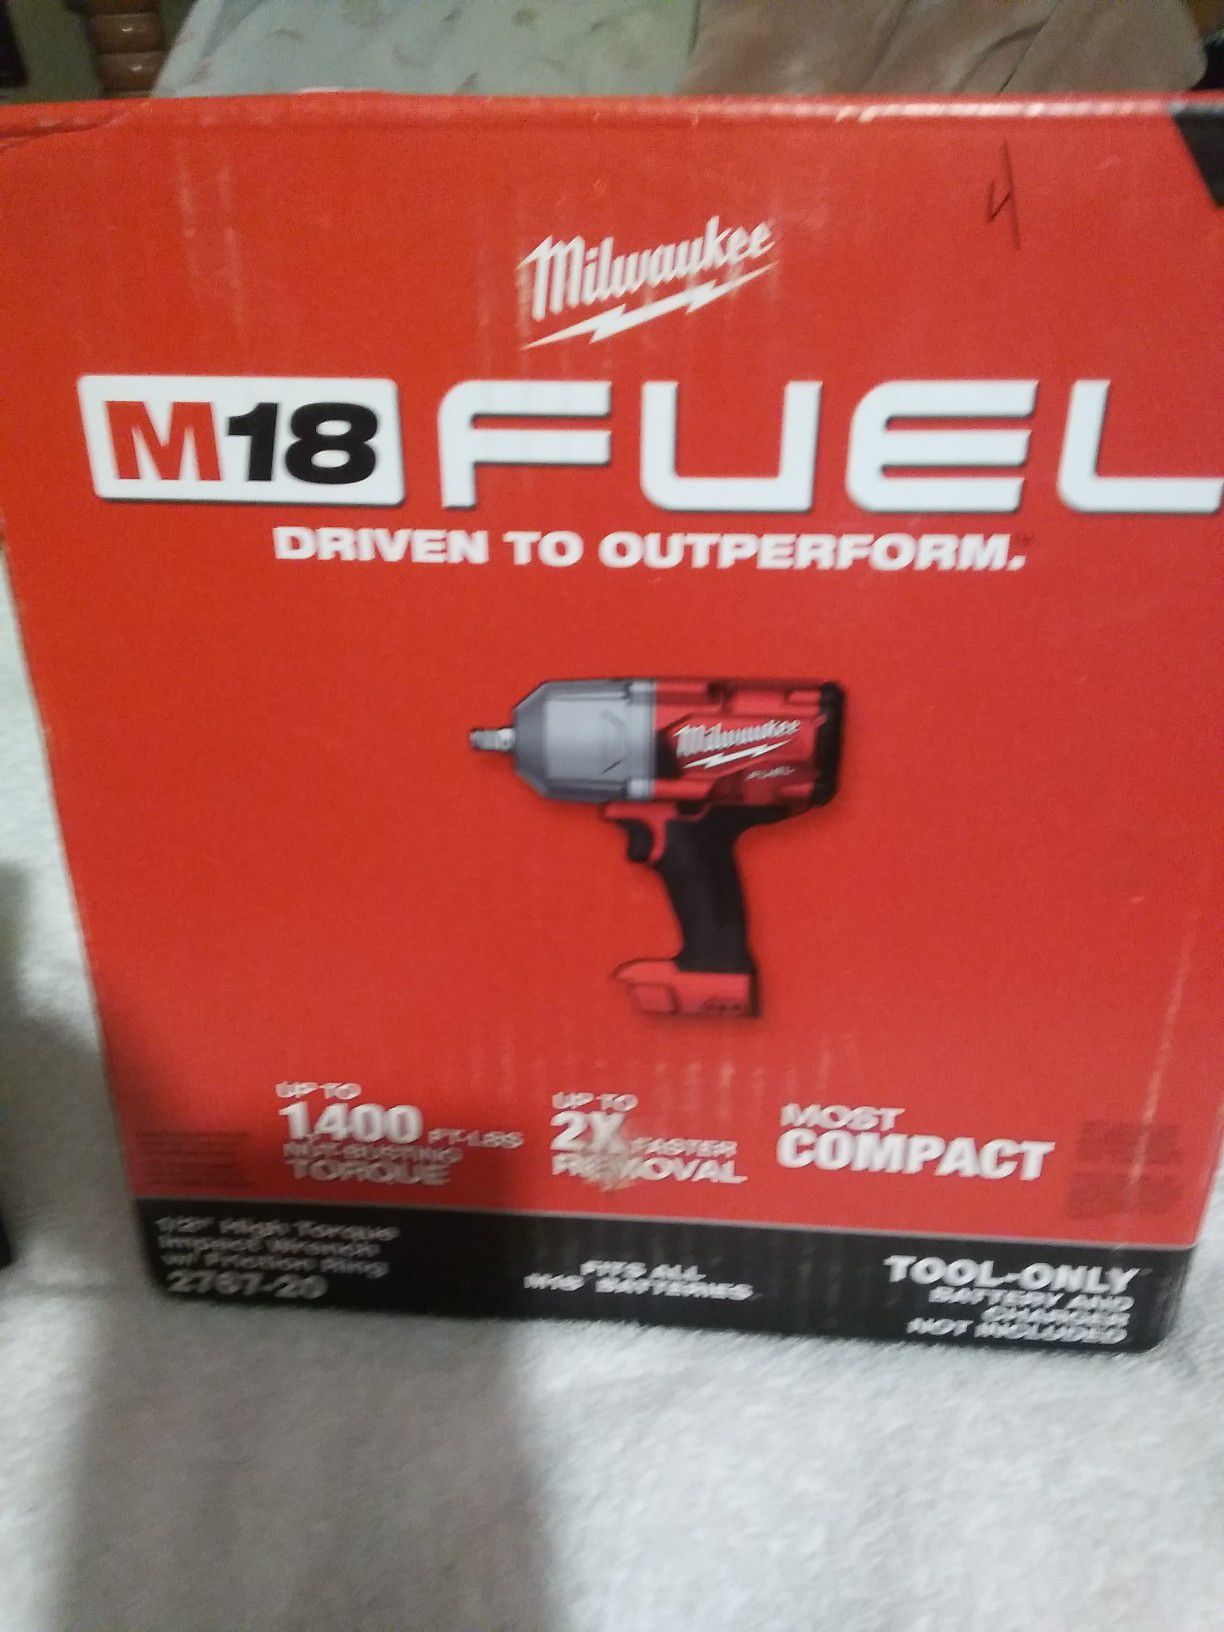 New Milwaukee M18 fuell high torque impact wrench set